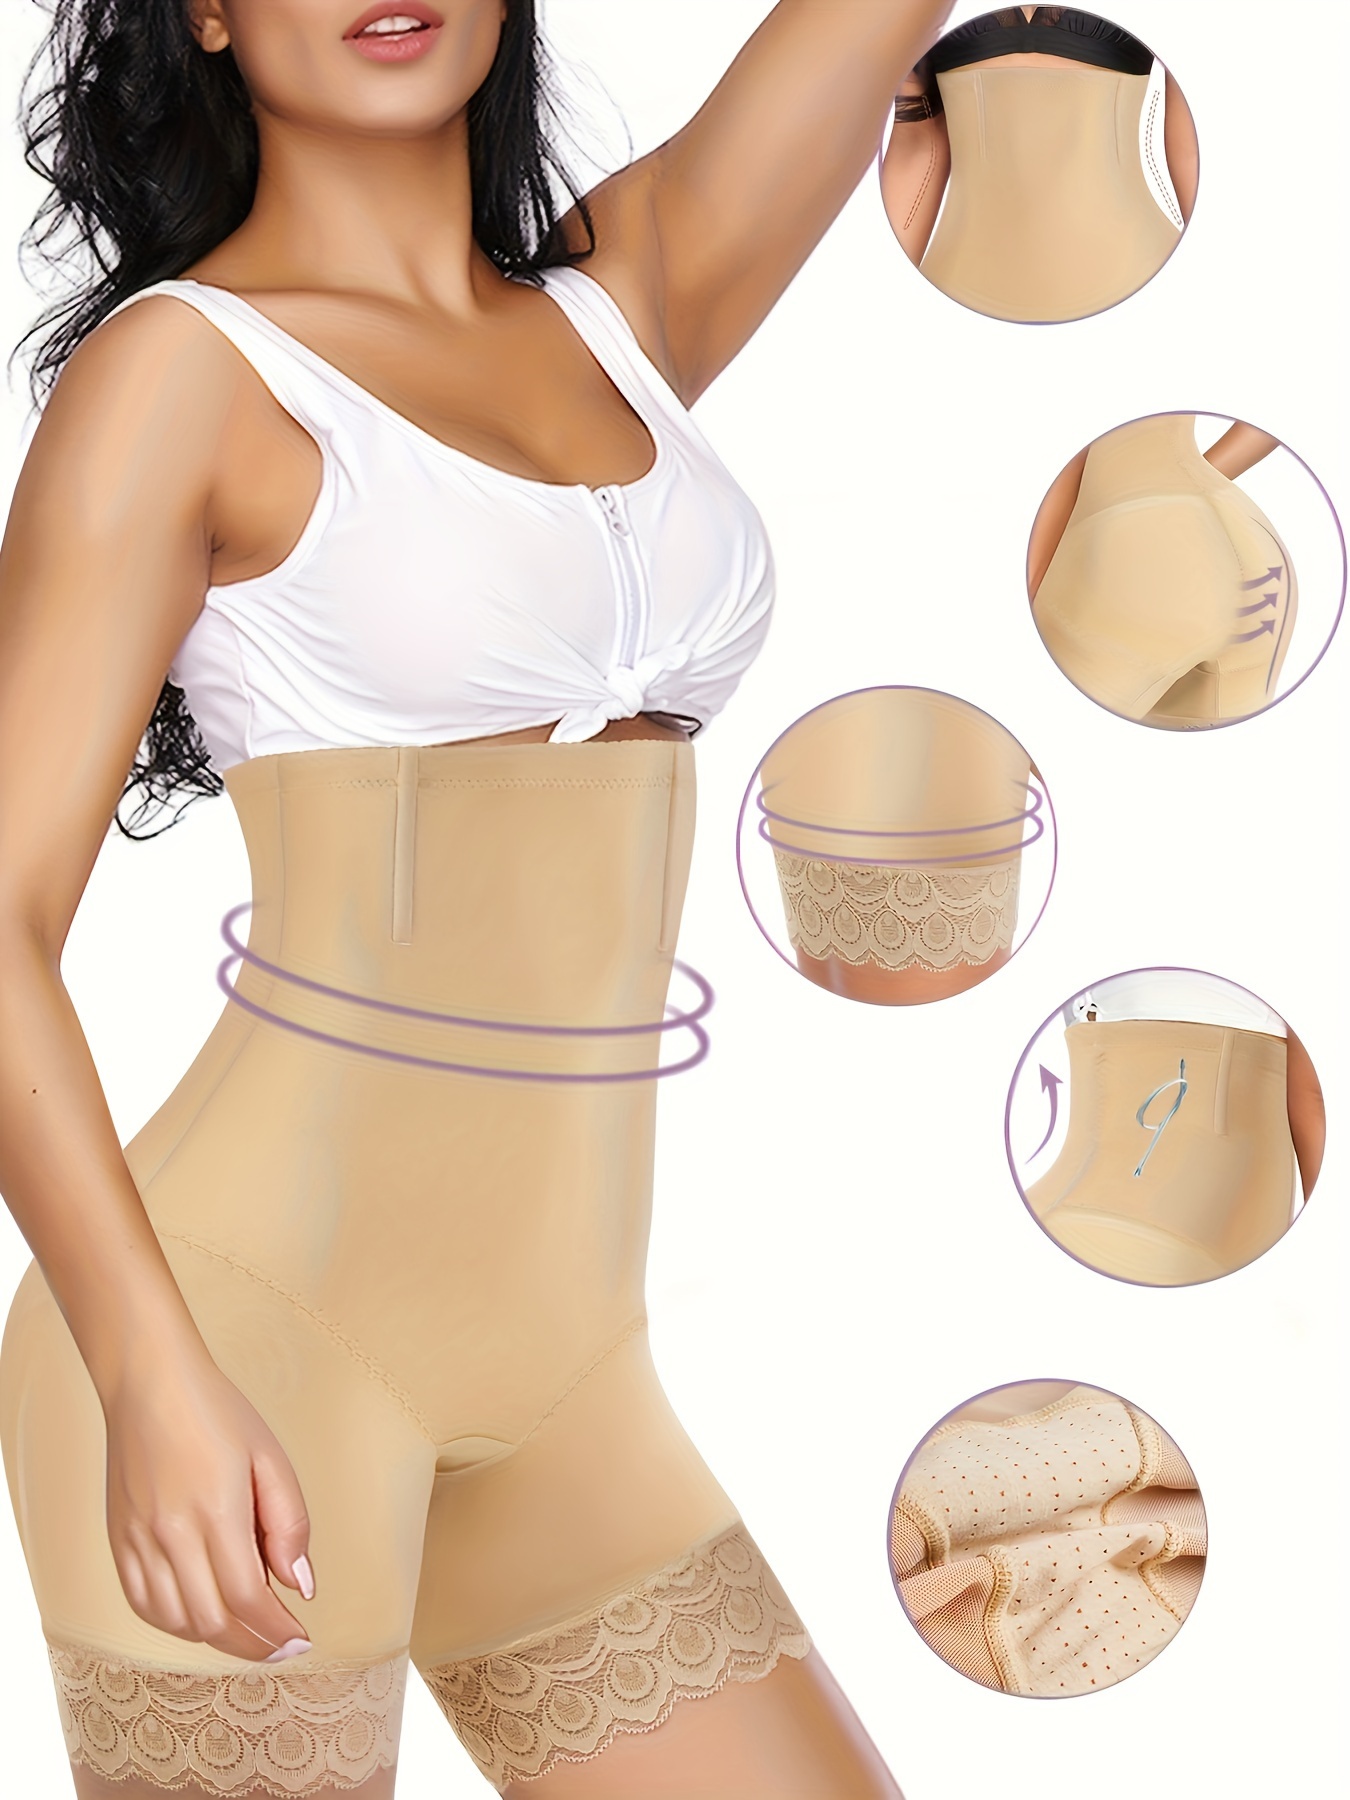 KLONKEE Tummy Control Shapewear Shorts for Women High Waist Thigh Plus Size  Butt Lifter Trainer Slimmer Body Shaper Panties Beige at  Women's  Clothing store